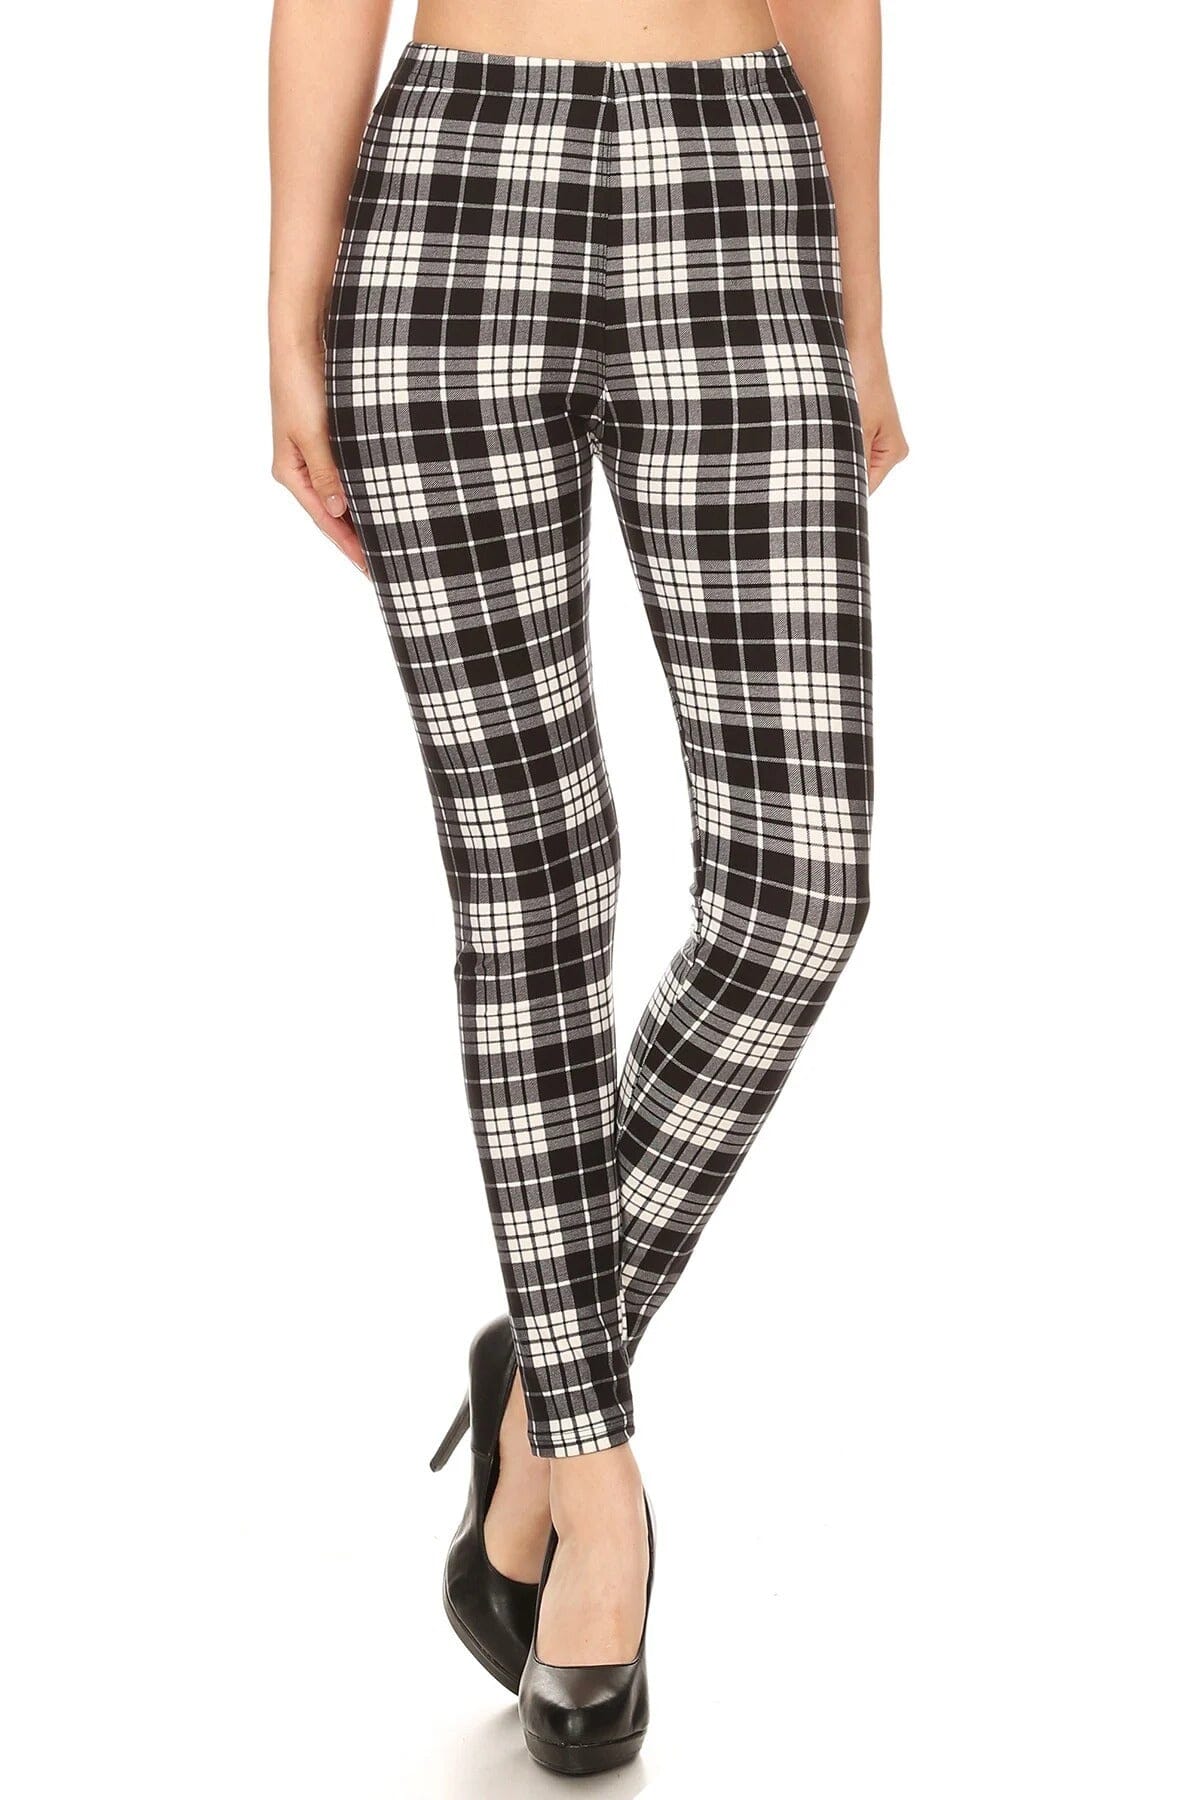 Plaid High Waisted Leggings In A Fitted Style, With An Elastic Waistband Bottoms jehouze 